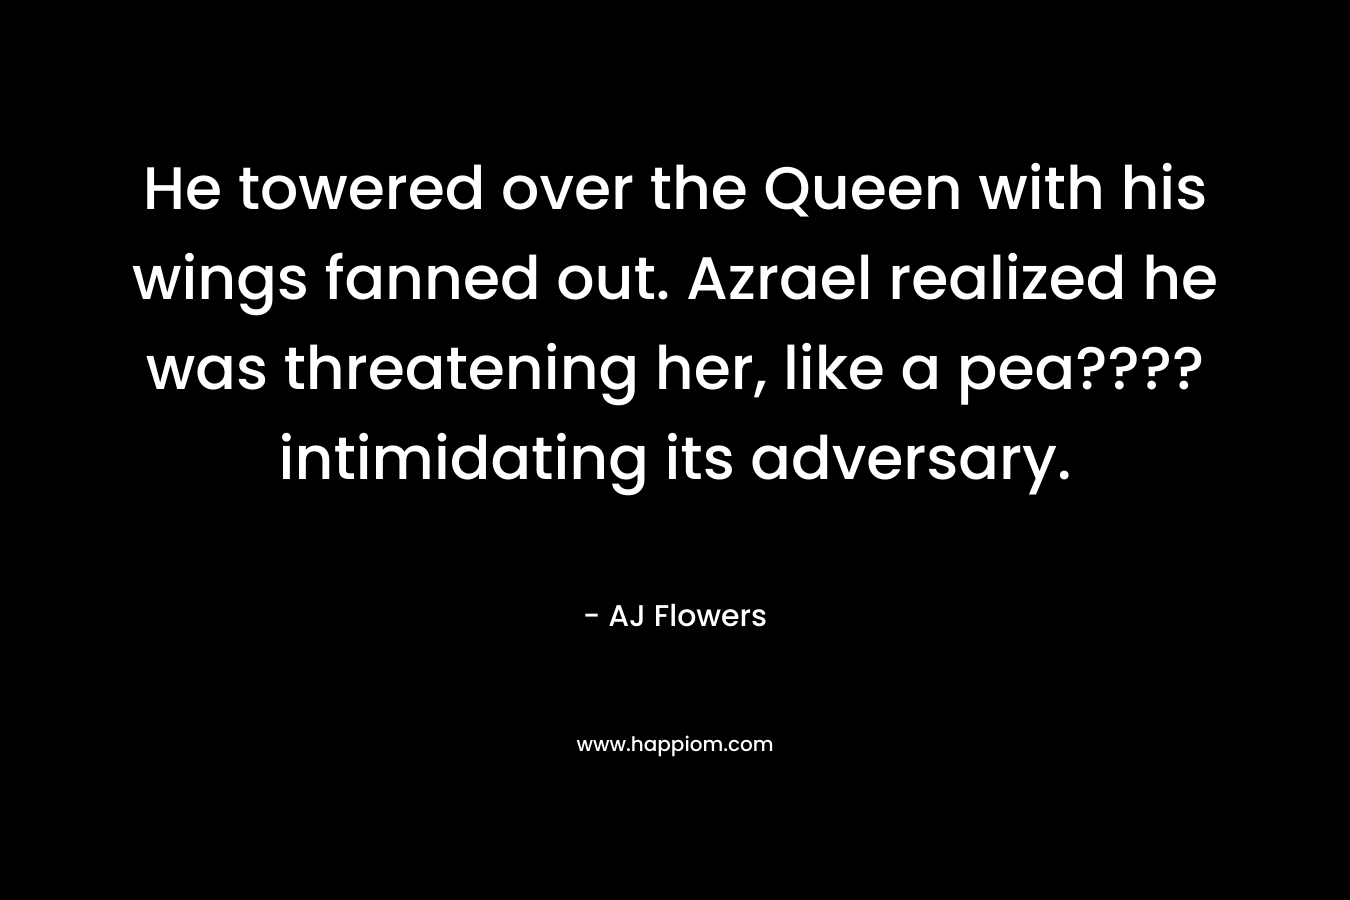 He towered over the Queen with his wings fanned out. Azrael realized he was threatening her, like a pea???? intimidating its adversary. – AJ Flowers